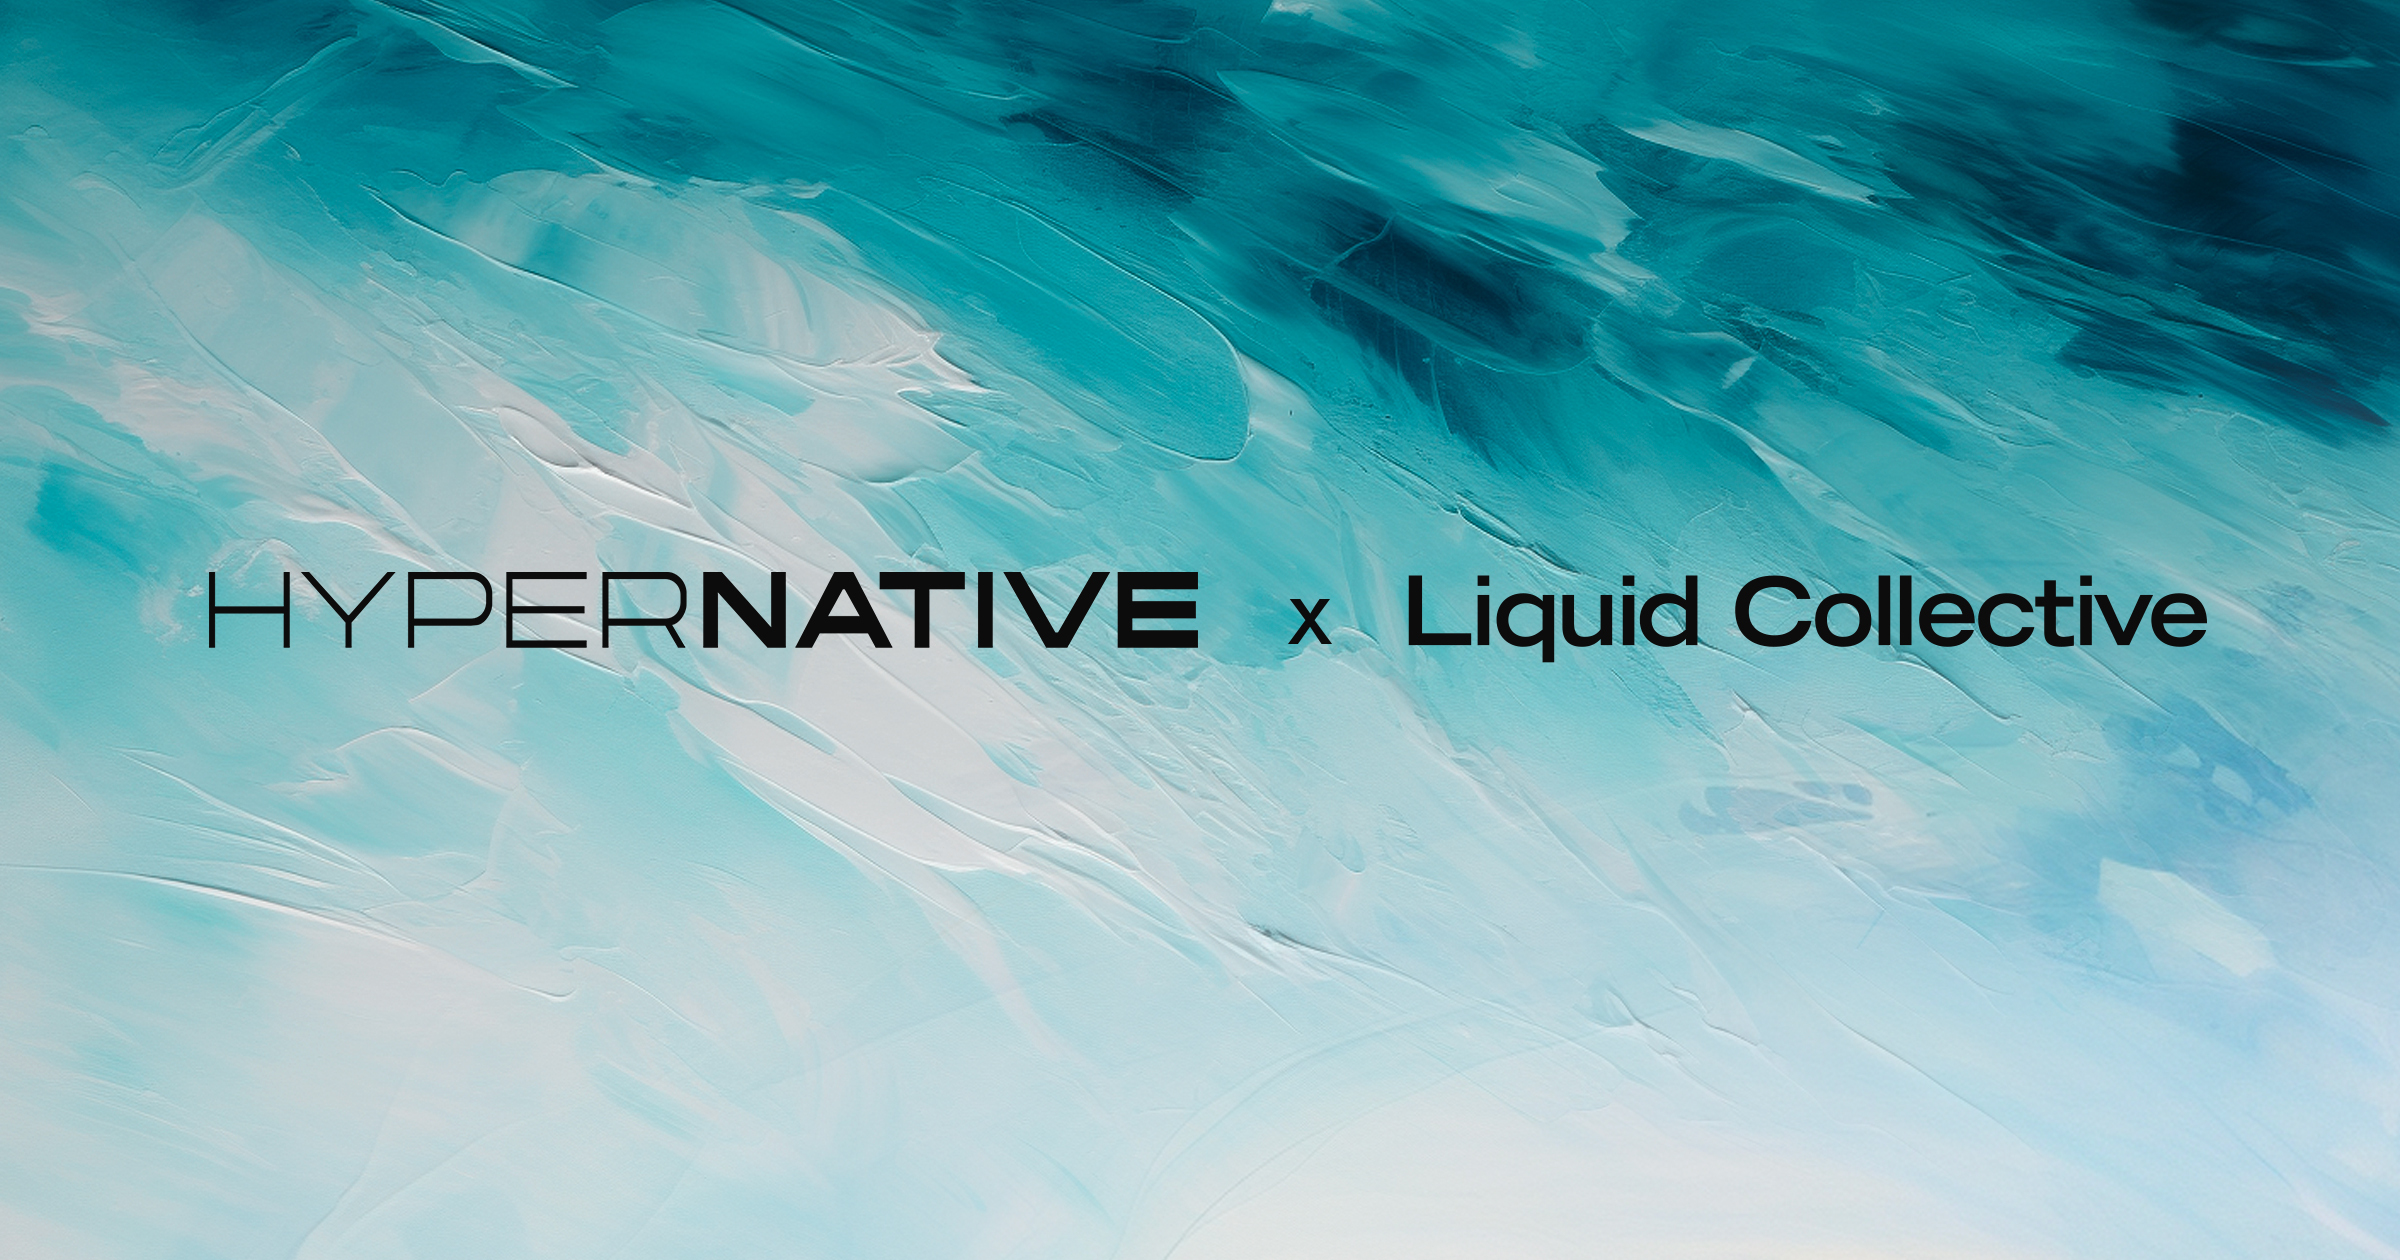 November: Hypernative & Liquid Collective collaborate to develop industry-leading protocol threat monitoring platform